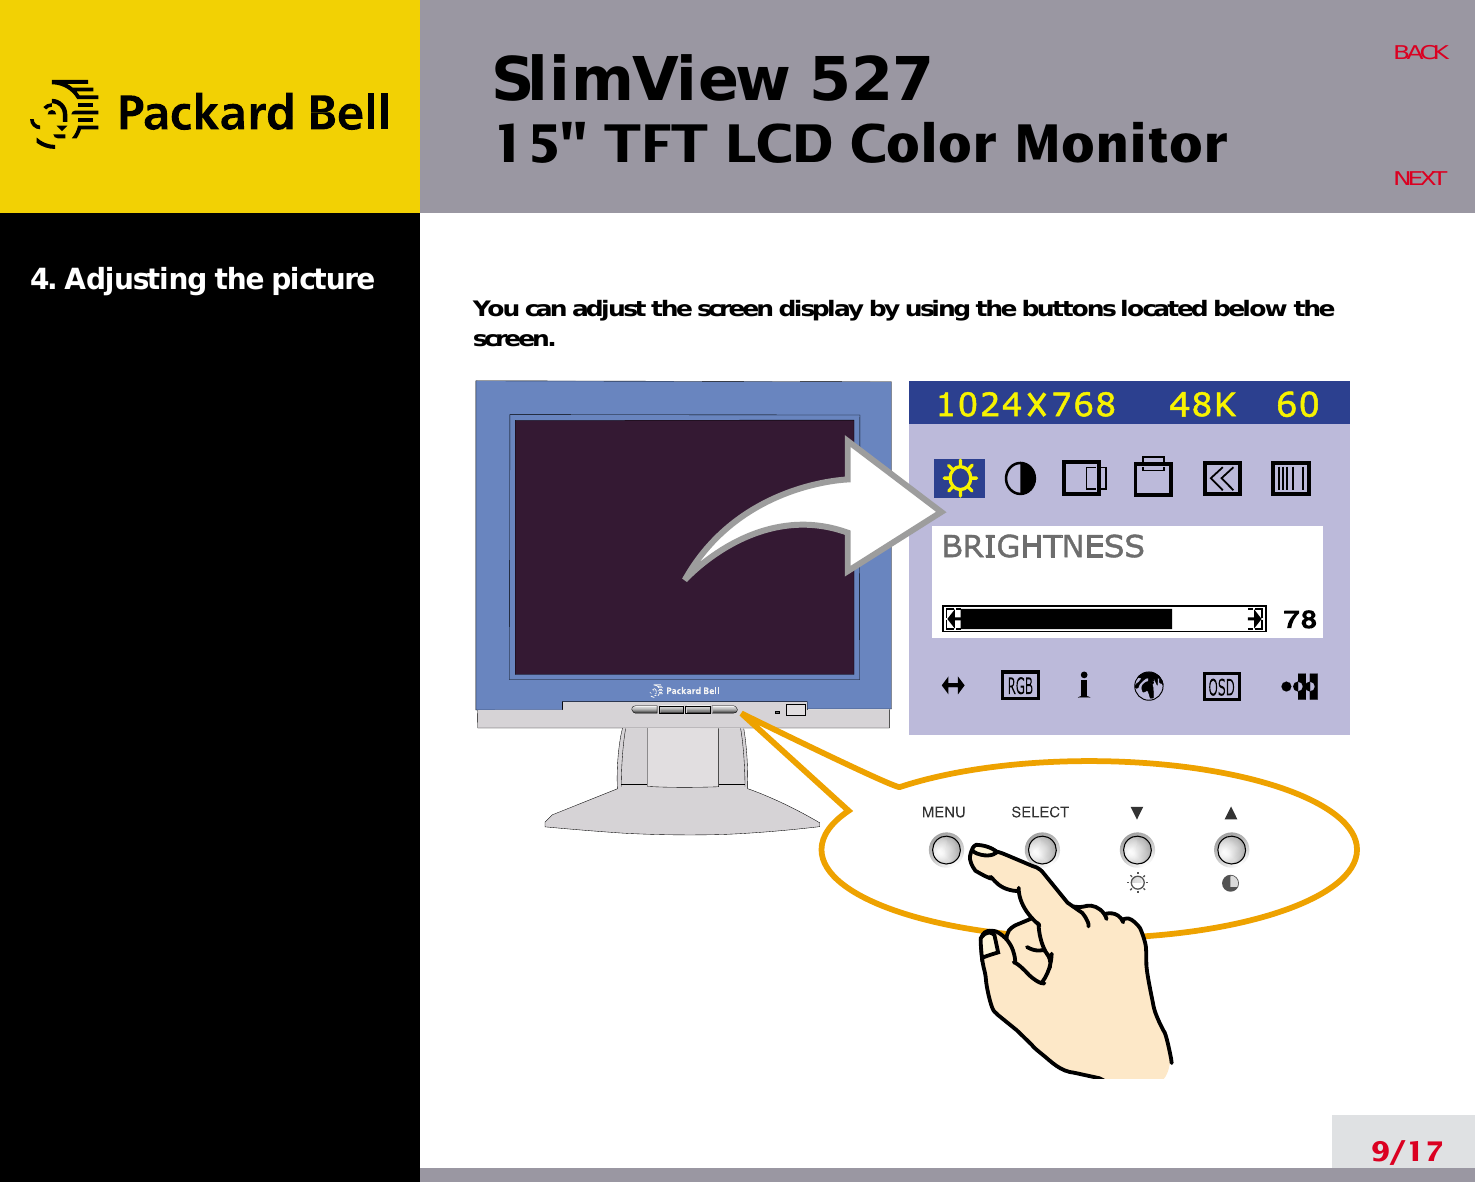 SlimView 52715&quot; TFT LCD Color Monitor4. Adjusting the picture9/17BACKNEXTYou can adjust the screen display by using the buttons located below thescreen.